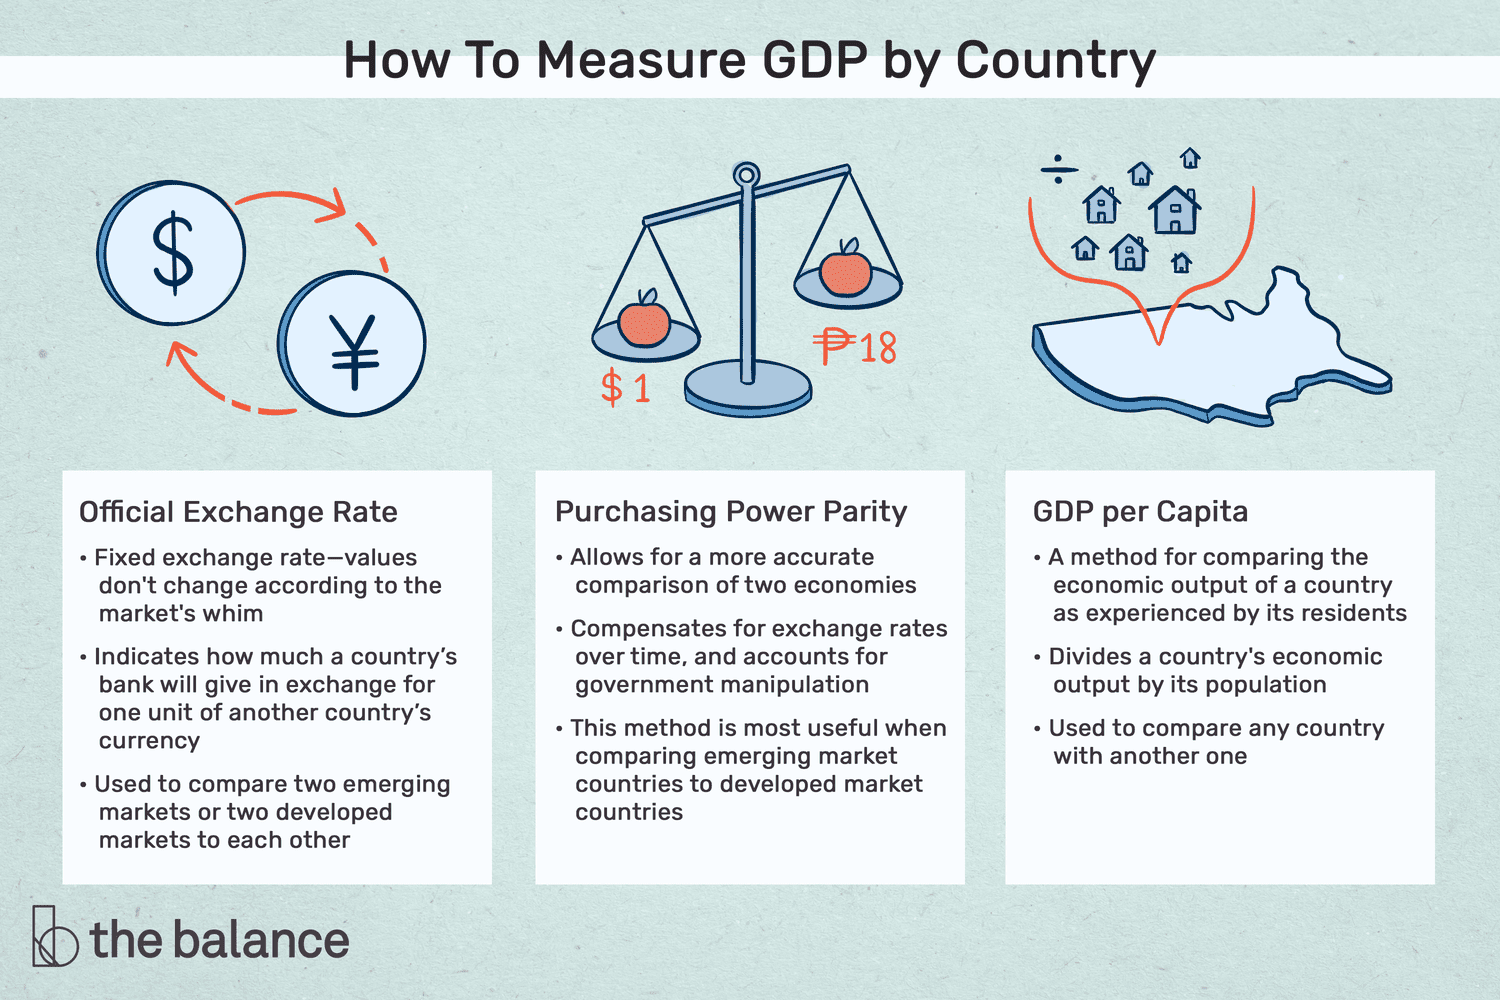 How to Measure GDP by country: official exchange rate, purchasing power parity, GDP per capita